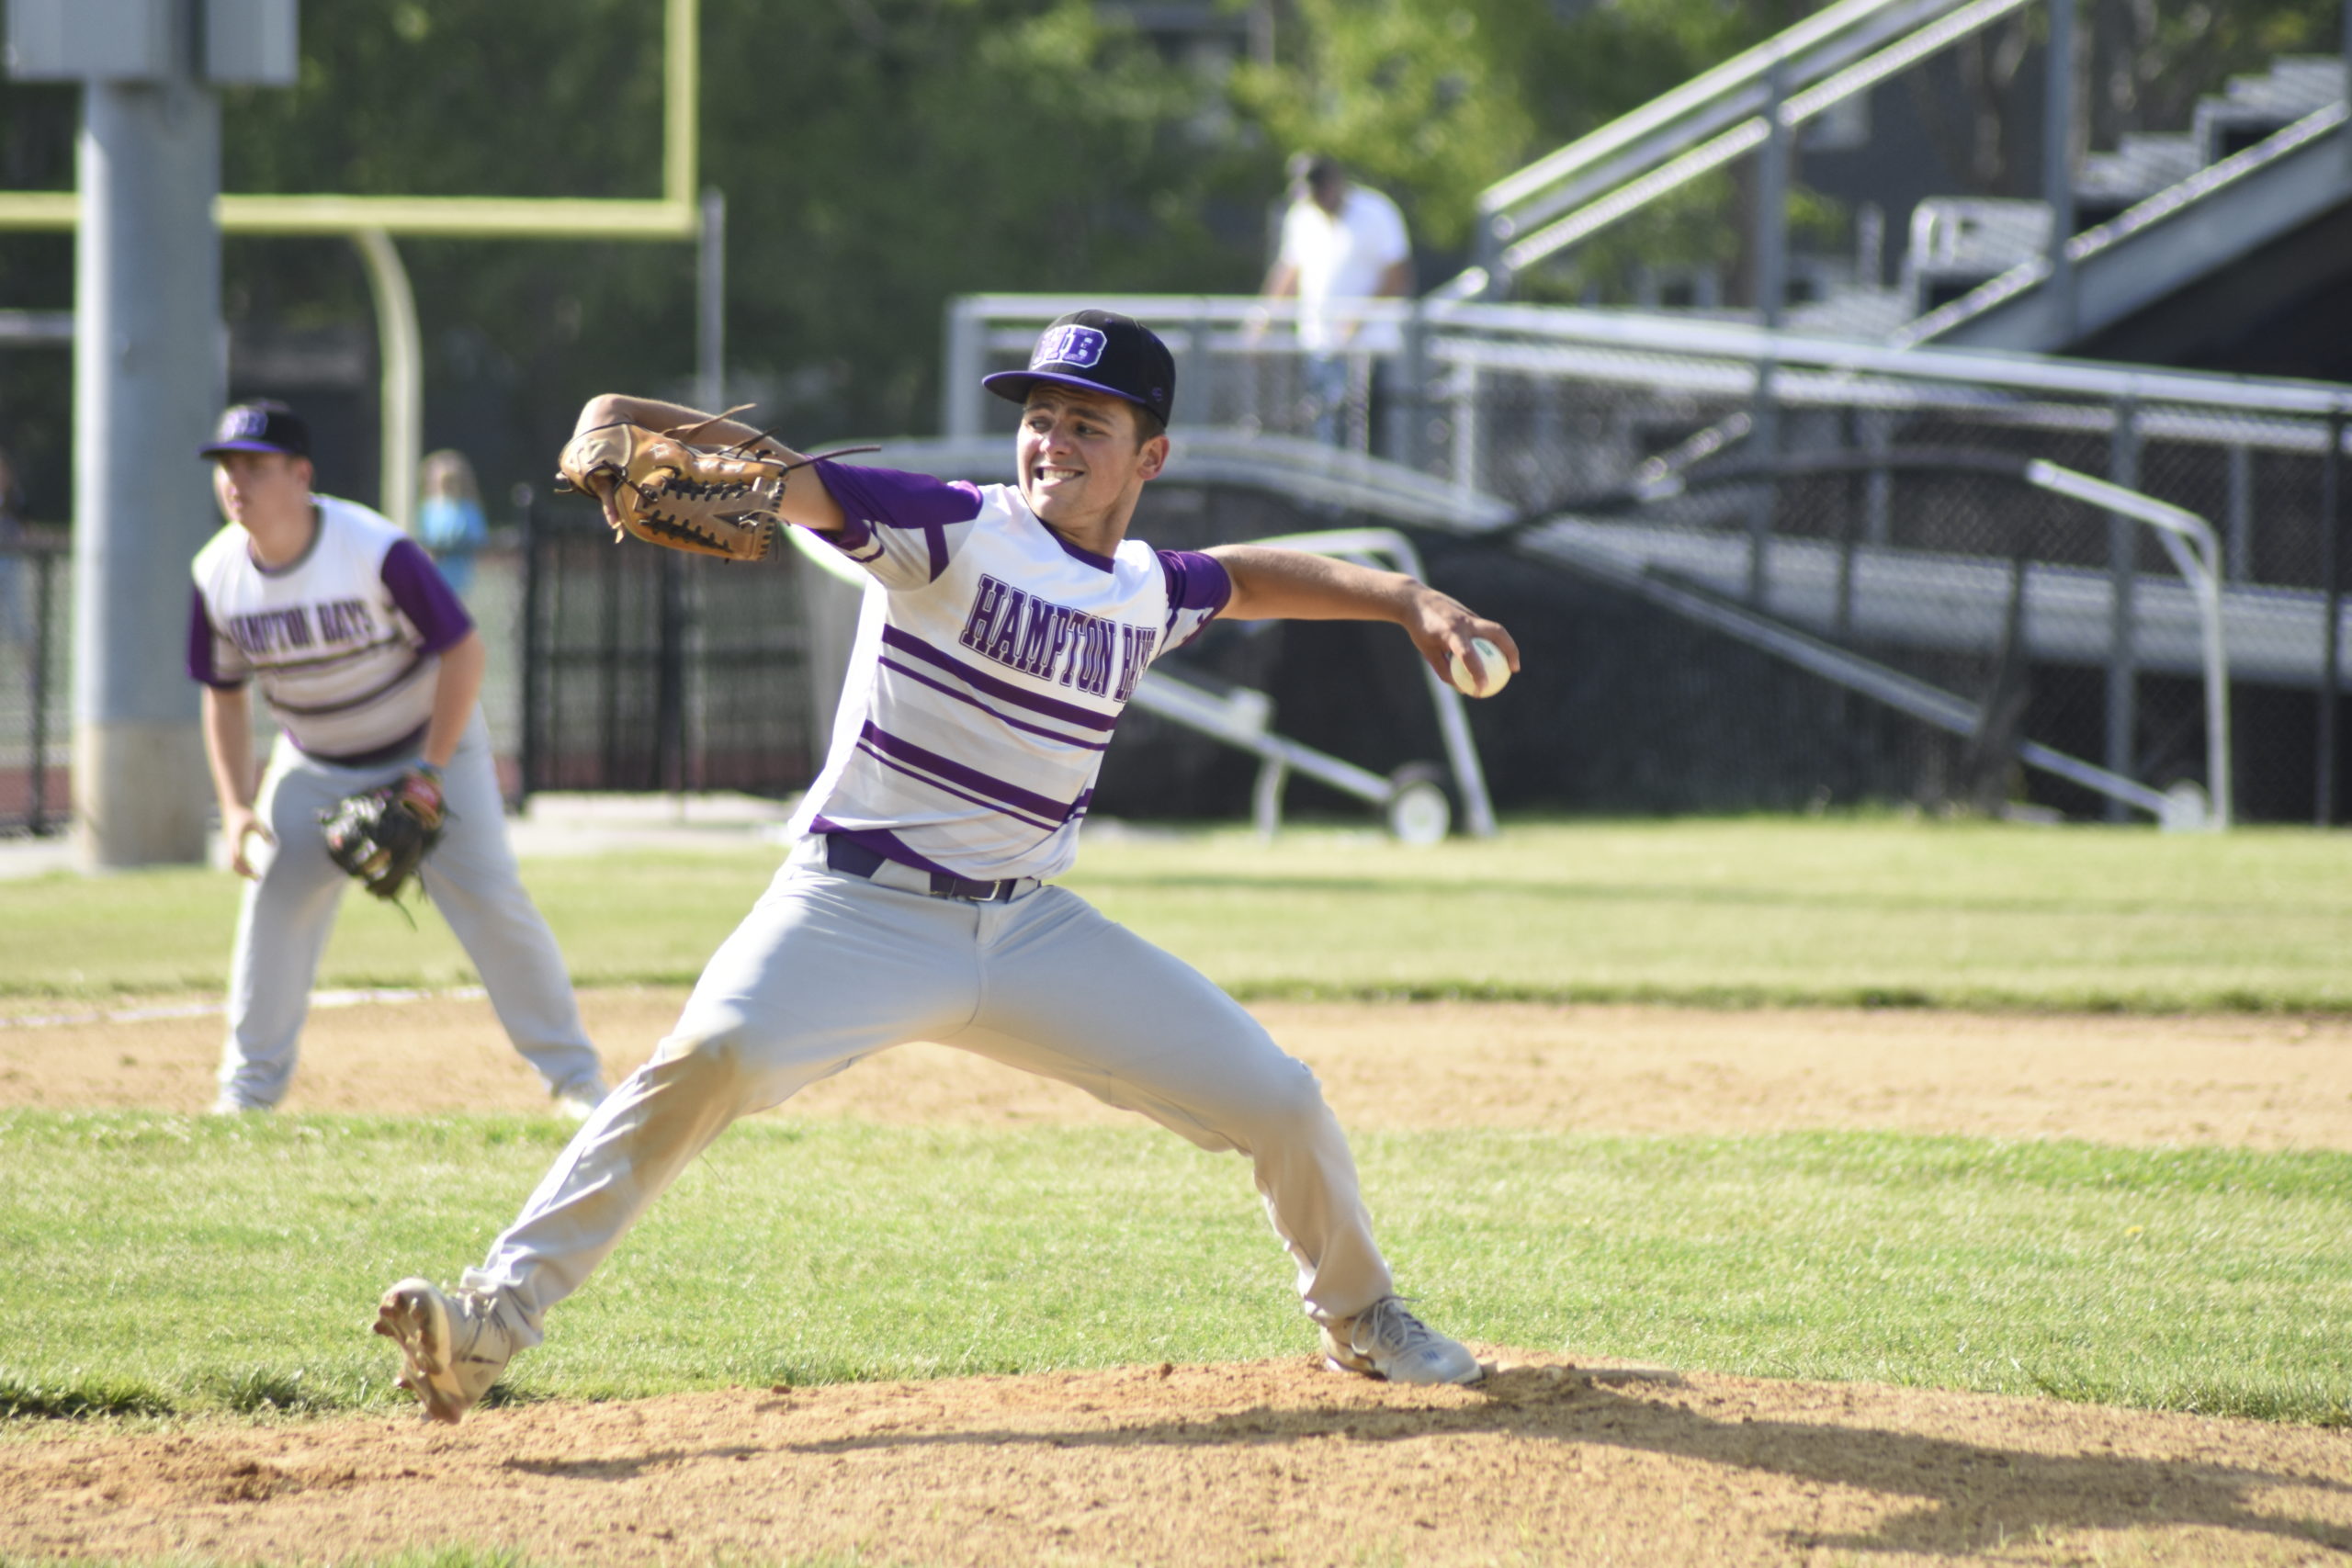 Hampton Bays senior Jordan Adelson delivers a pitch to the plate during Friday's blowout victory.